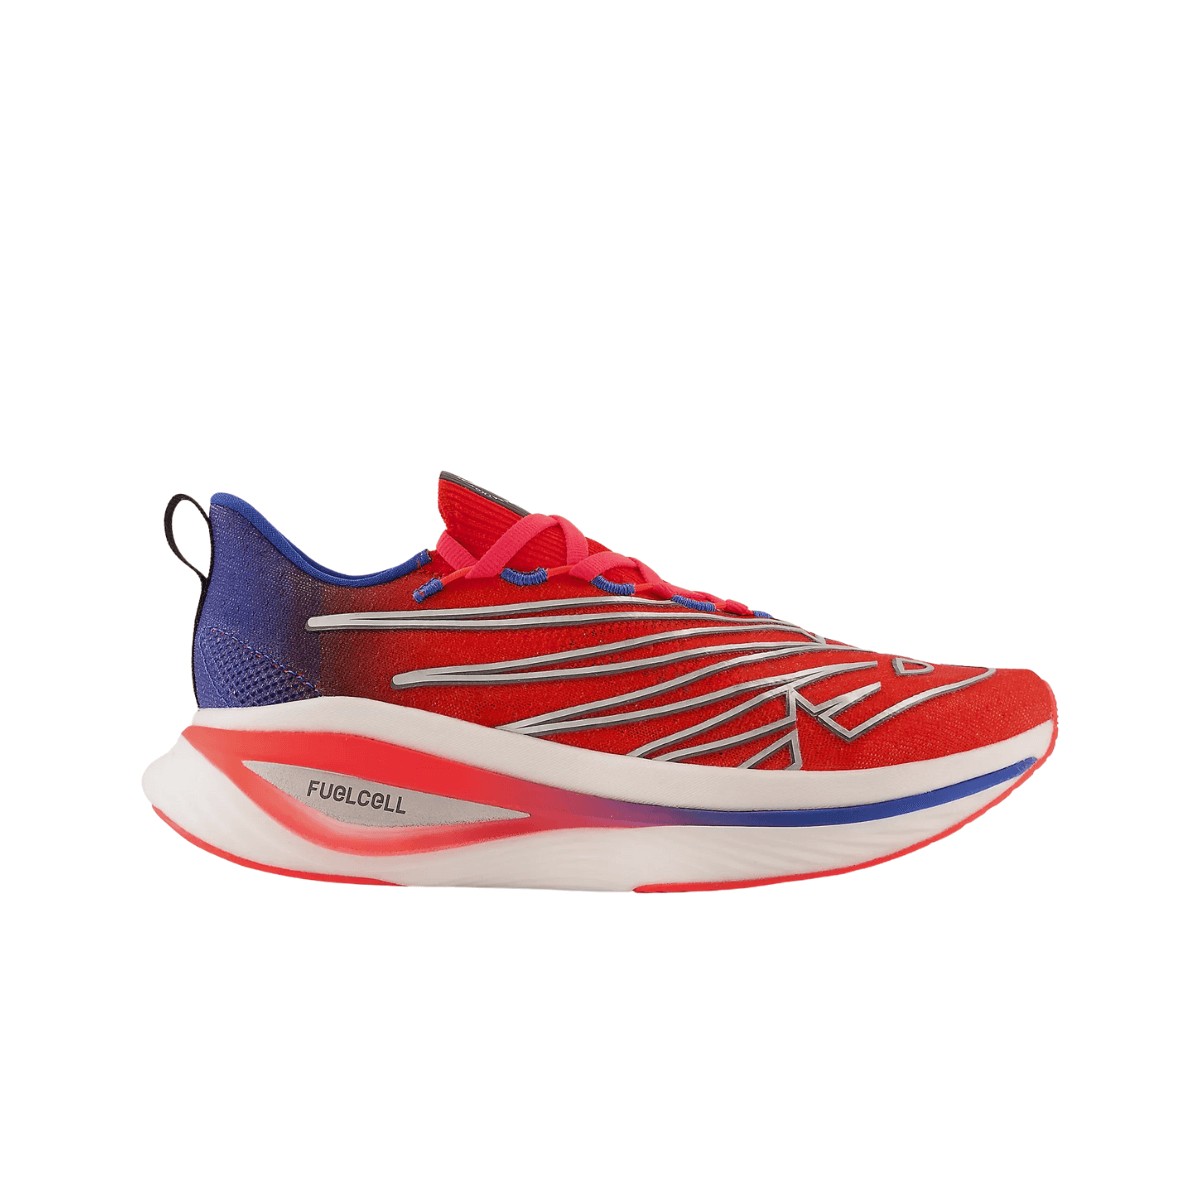 Chaussures New Balance FuelCell SC Elite V3 NYC Marathon Rouge Bleu AW22, Taille 41,5 - EUR